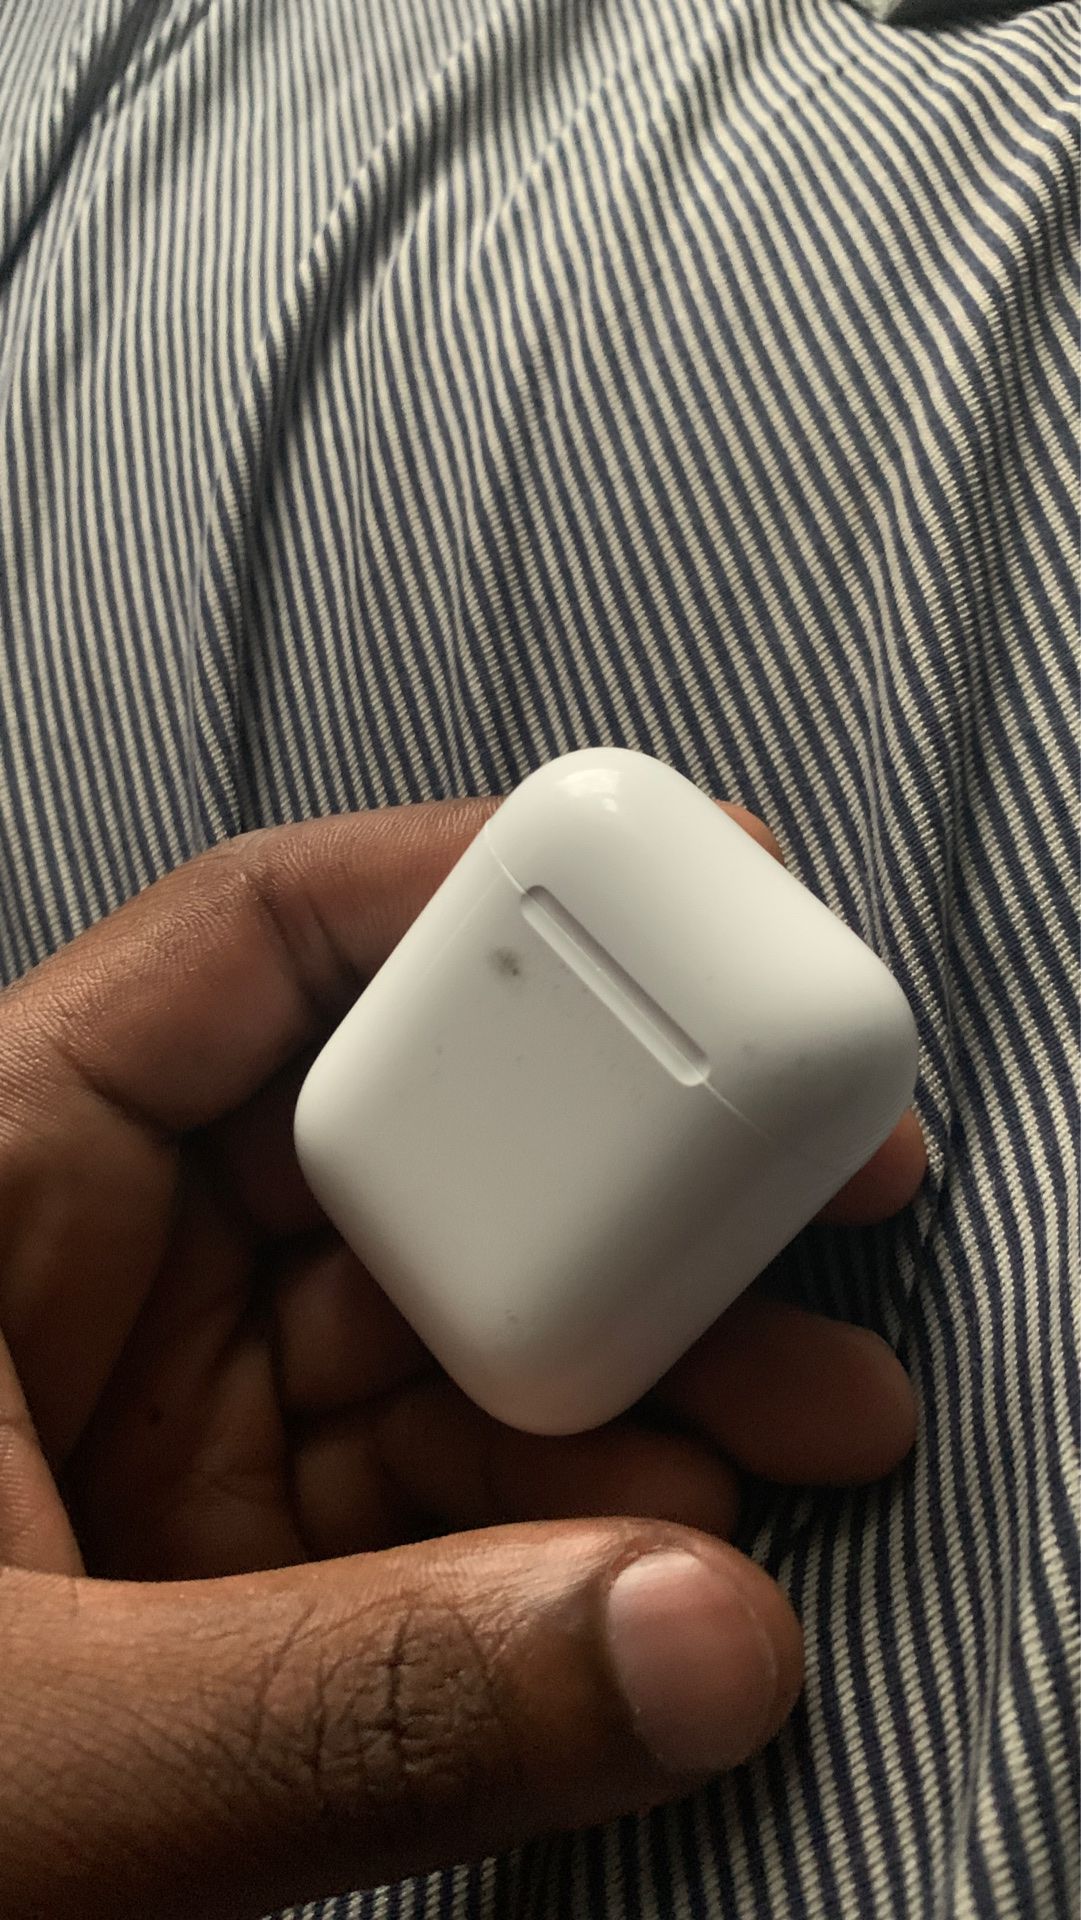 AirPods for sale